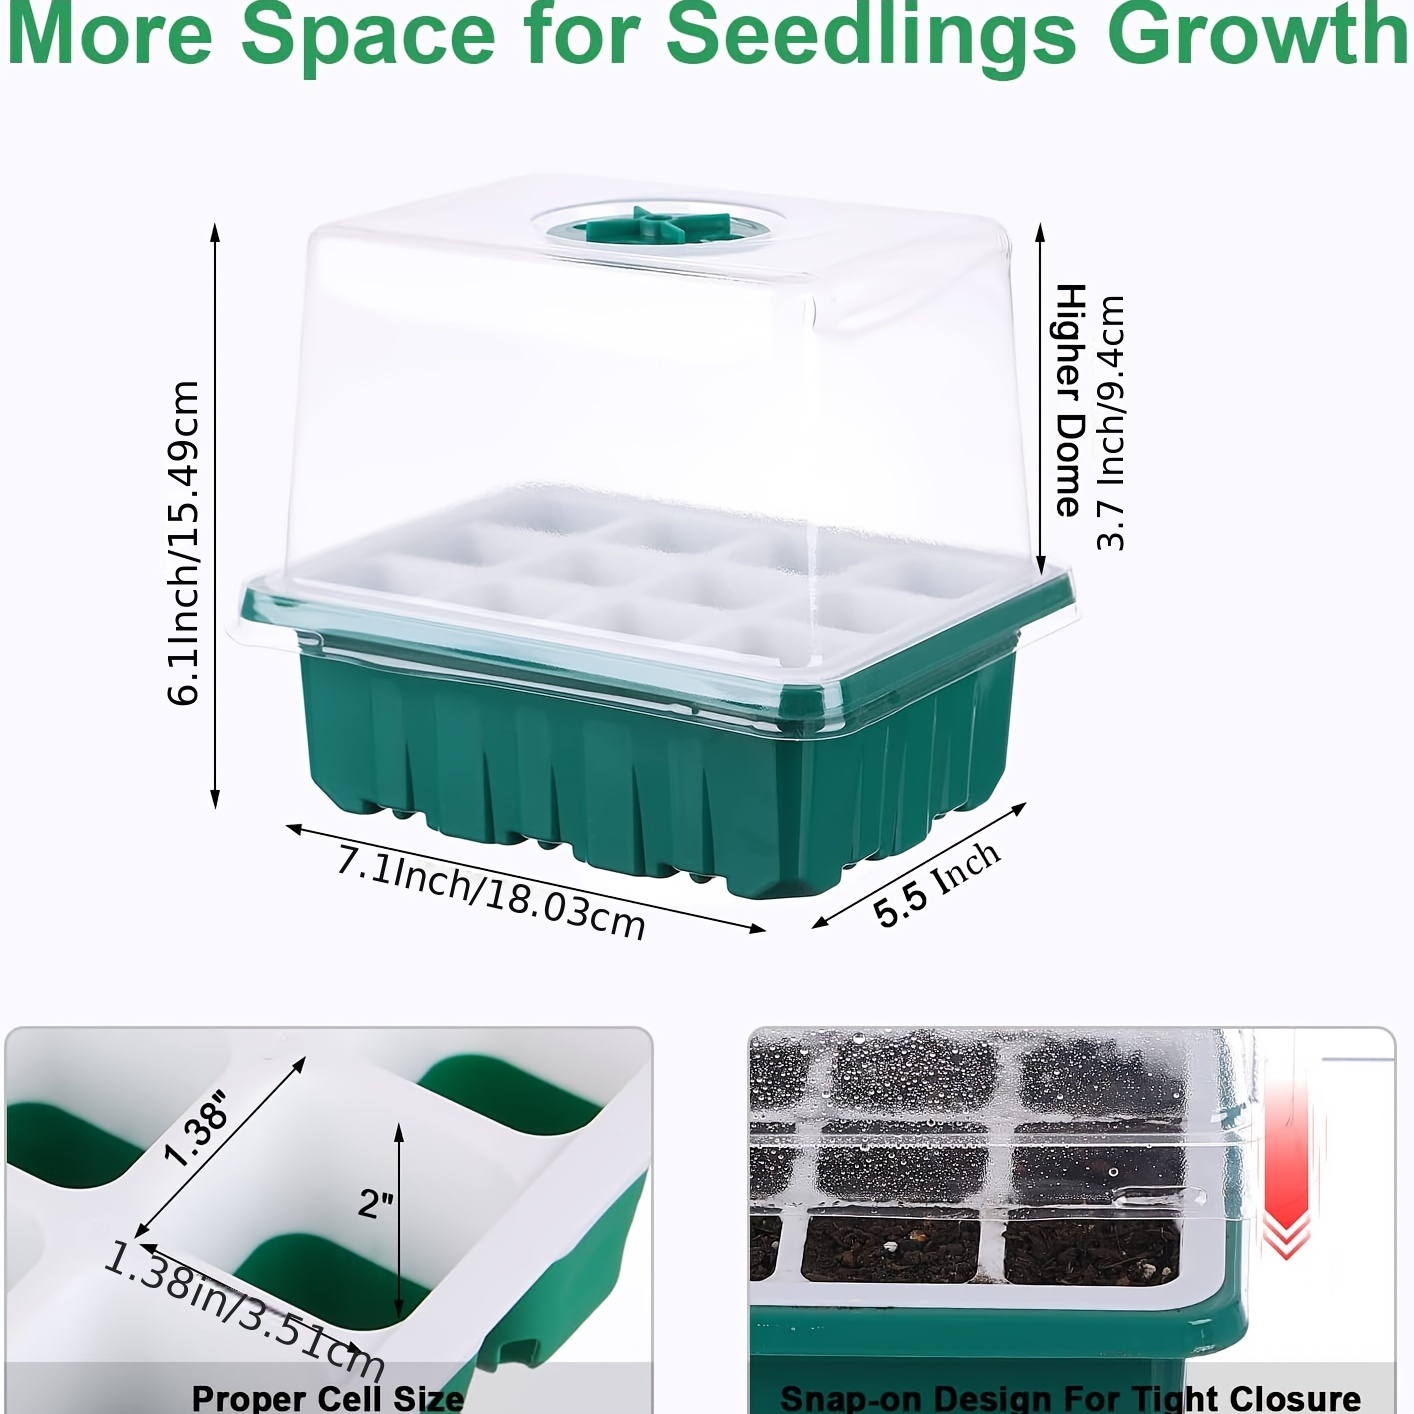 Seed Starter Tray, Reusable Seed Starter Kit, Silicone Seedling Starter Trays for Starting Plant Seeds, Seed Starting Trays with Flexible Pop-Out